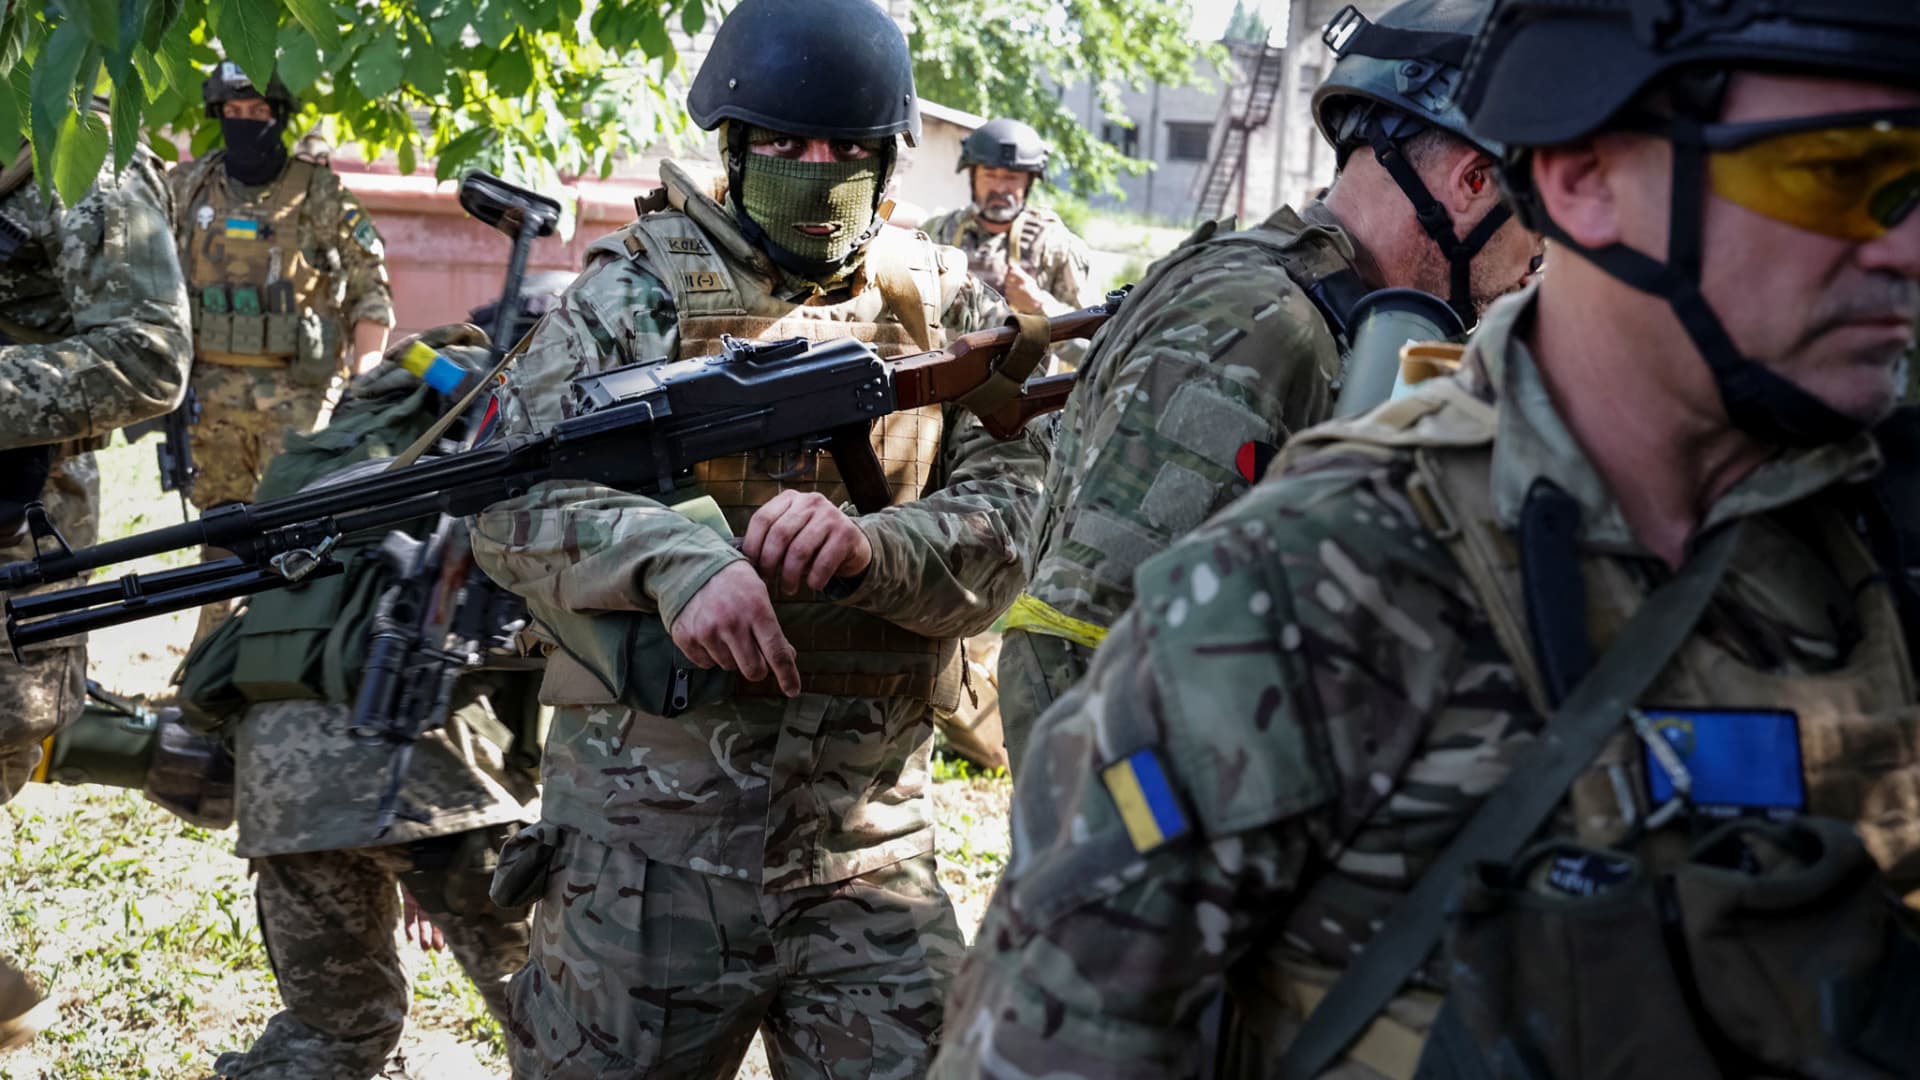 Members of foreign volunteers unit which fights in the Ukrainian army walk, as Russia's attack on Ukraine continues, in Sievierodonetsk, Luhansk region Ukraine June 2, 2022.